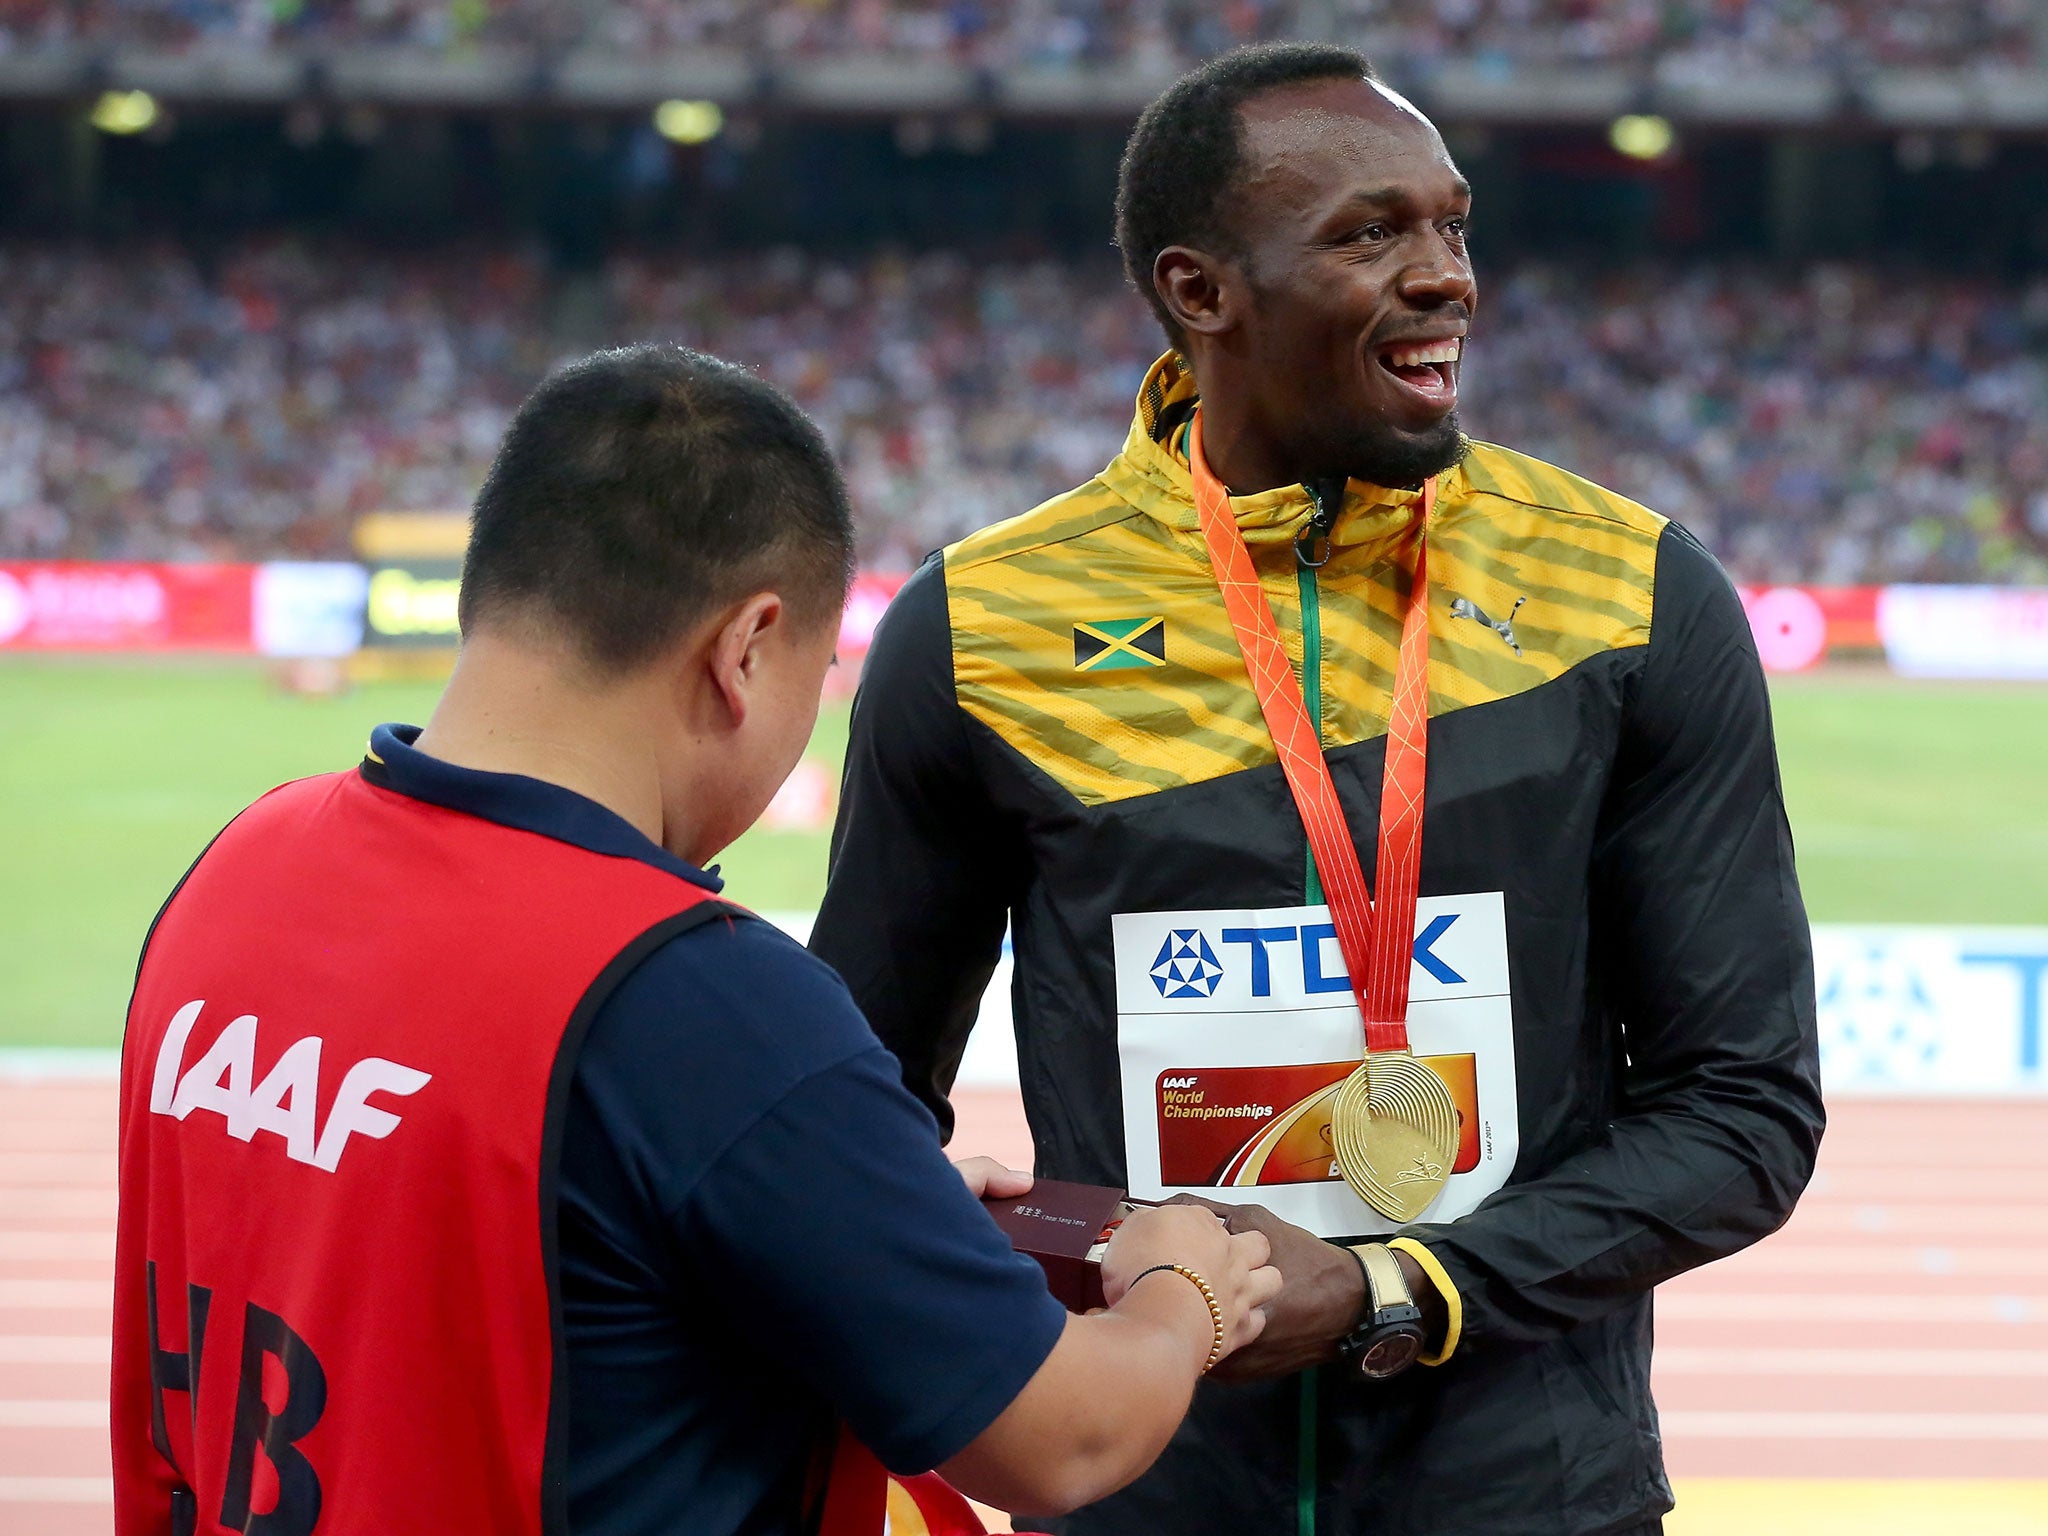 Song Tao presents Usain Bolt with his gift